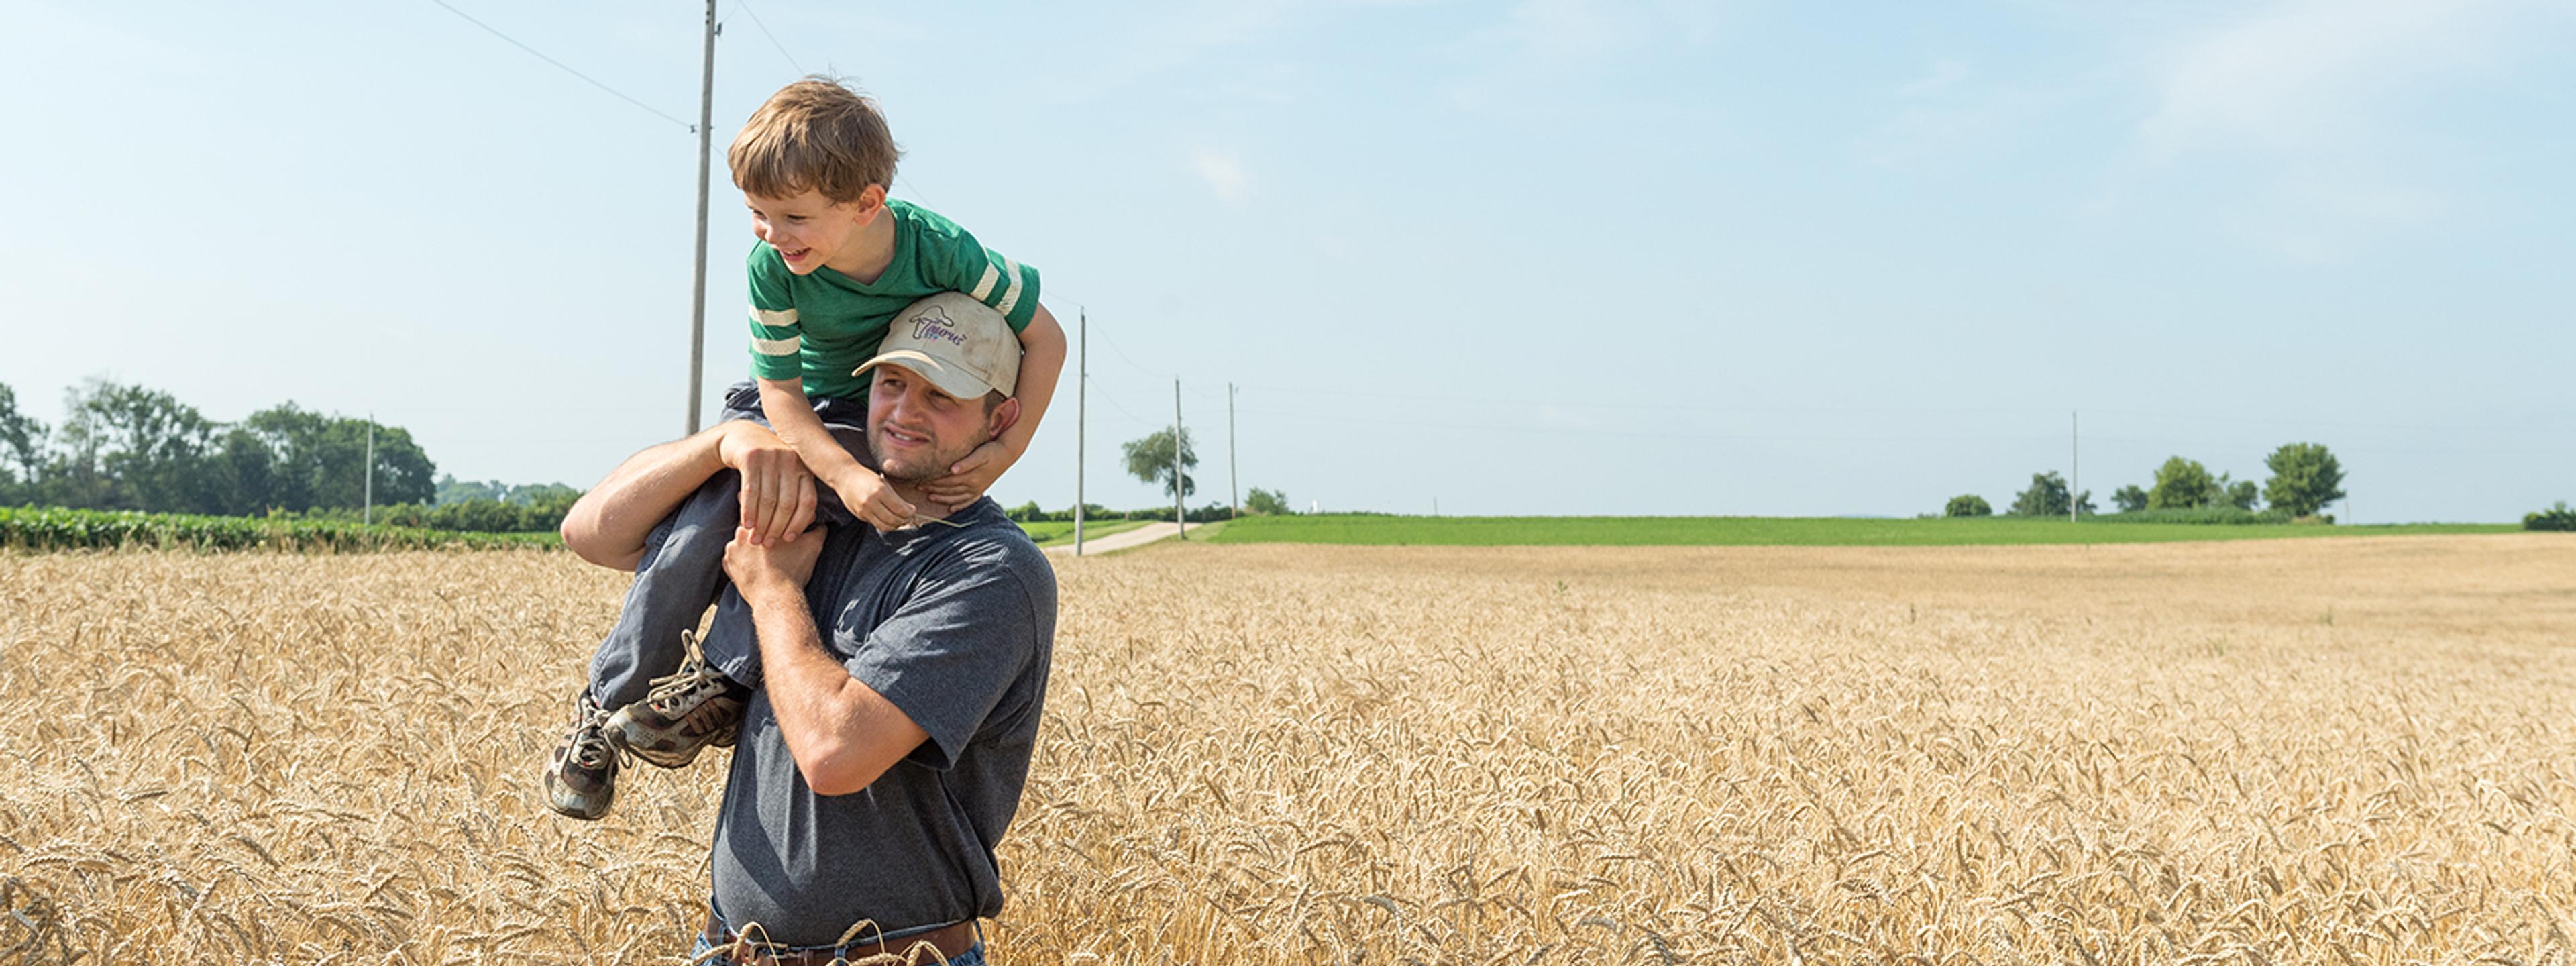 Farmer holding son on his shoulders while crossing a field.